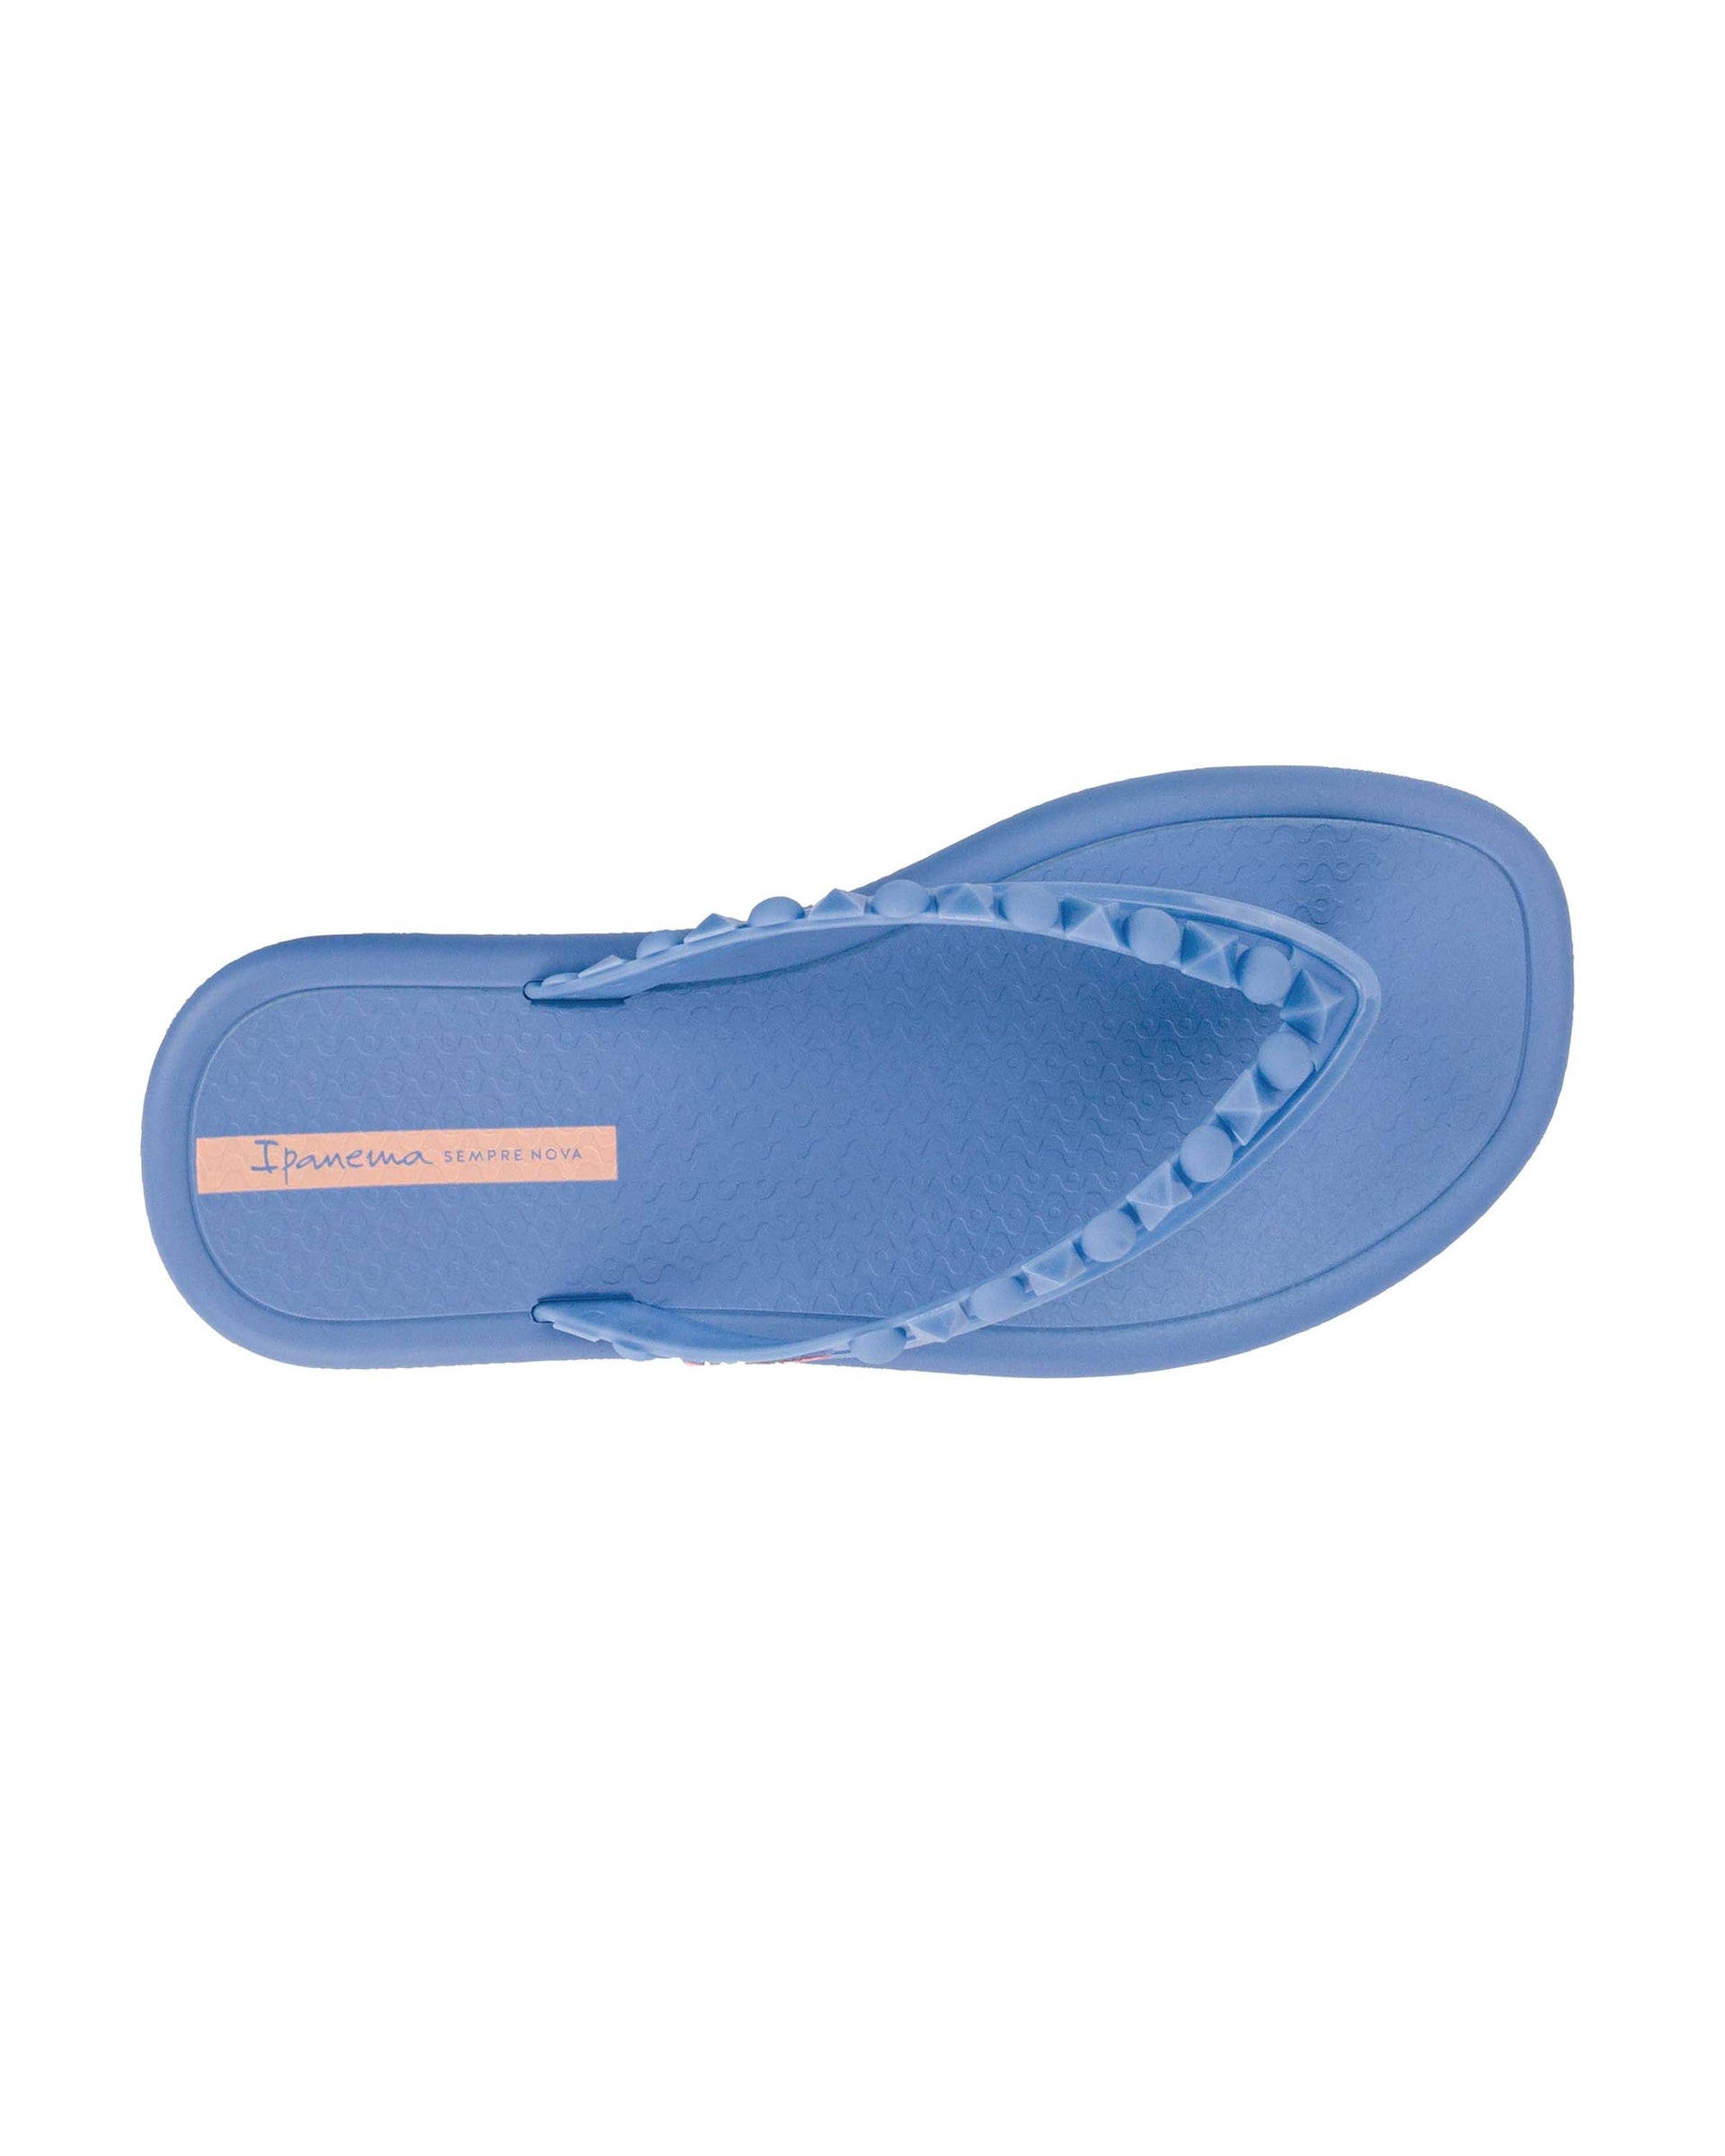 Top view of a blue Ipanema Meu Sol women's flip flop with stud details on strap.